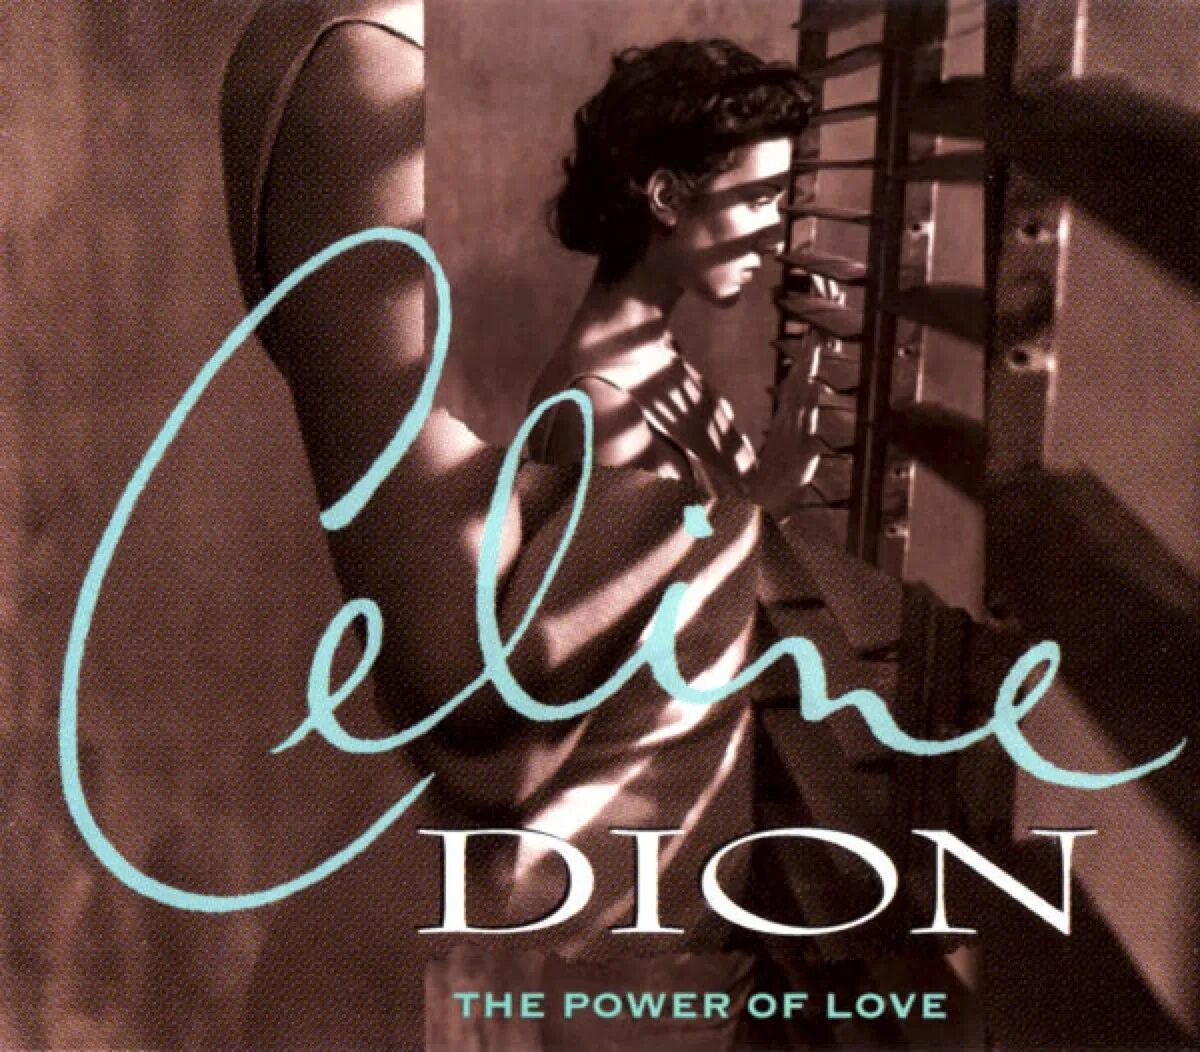 Dion power of love